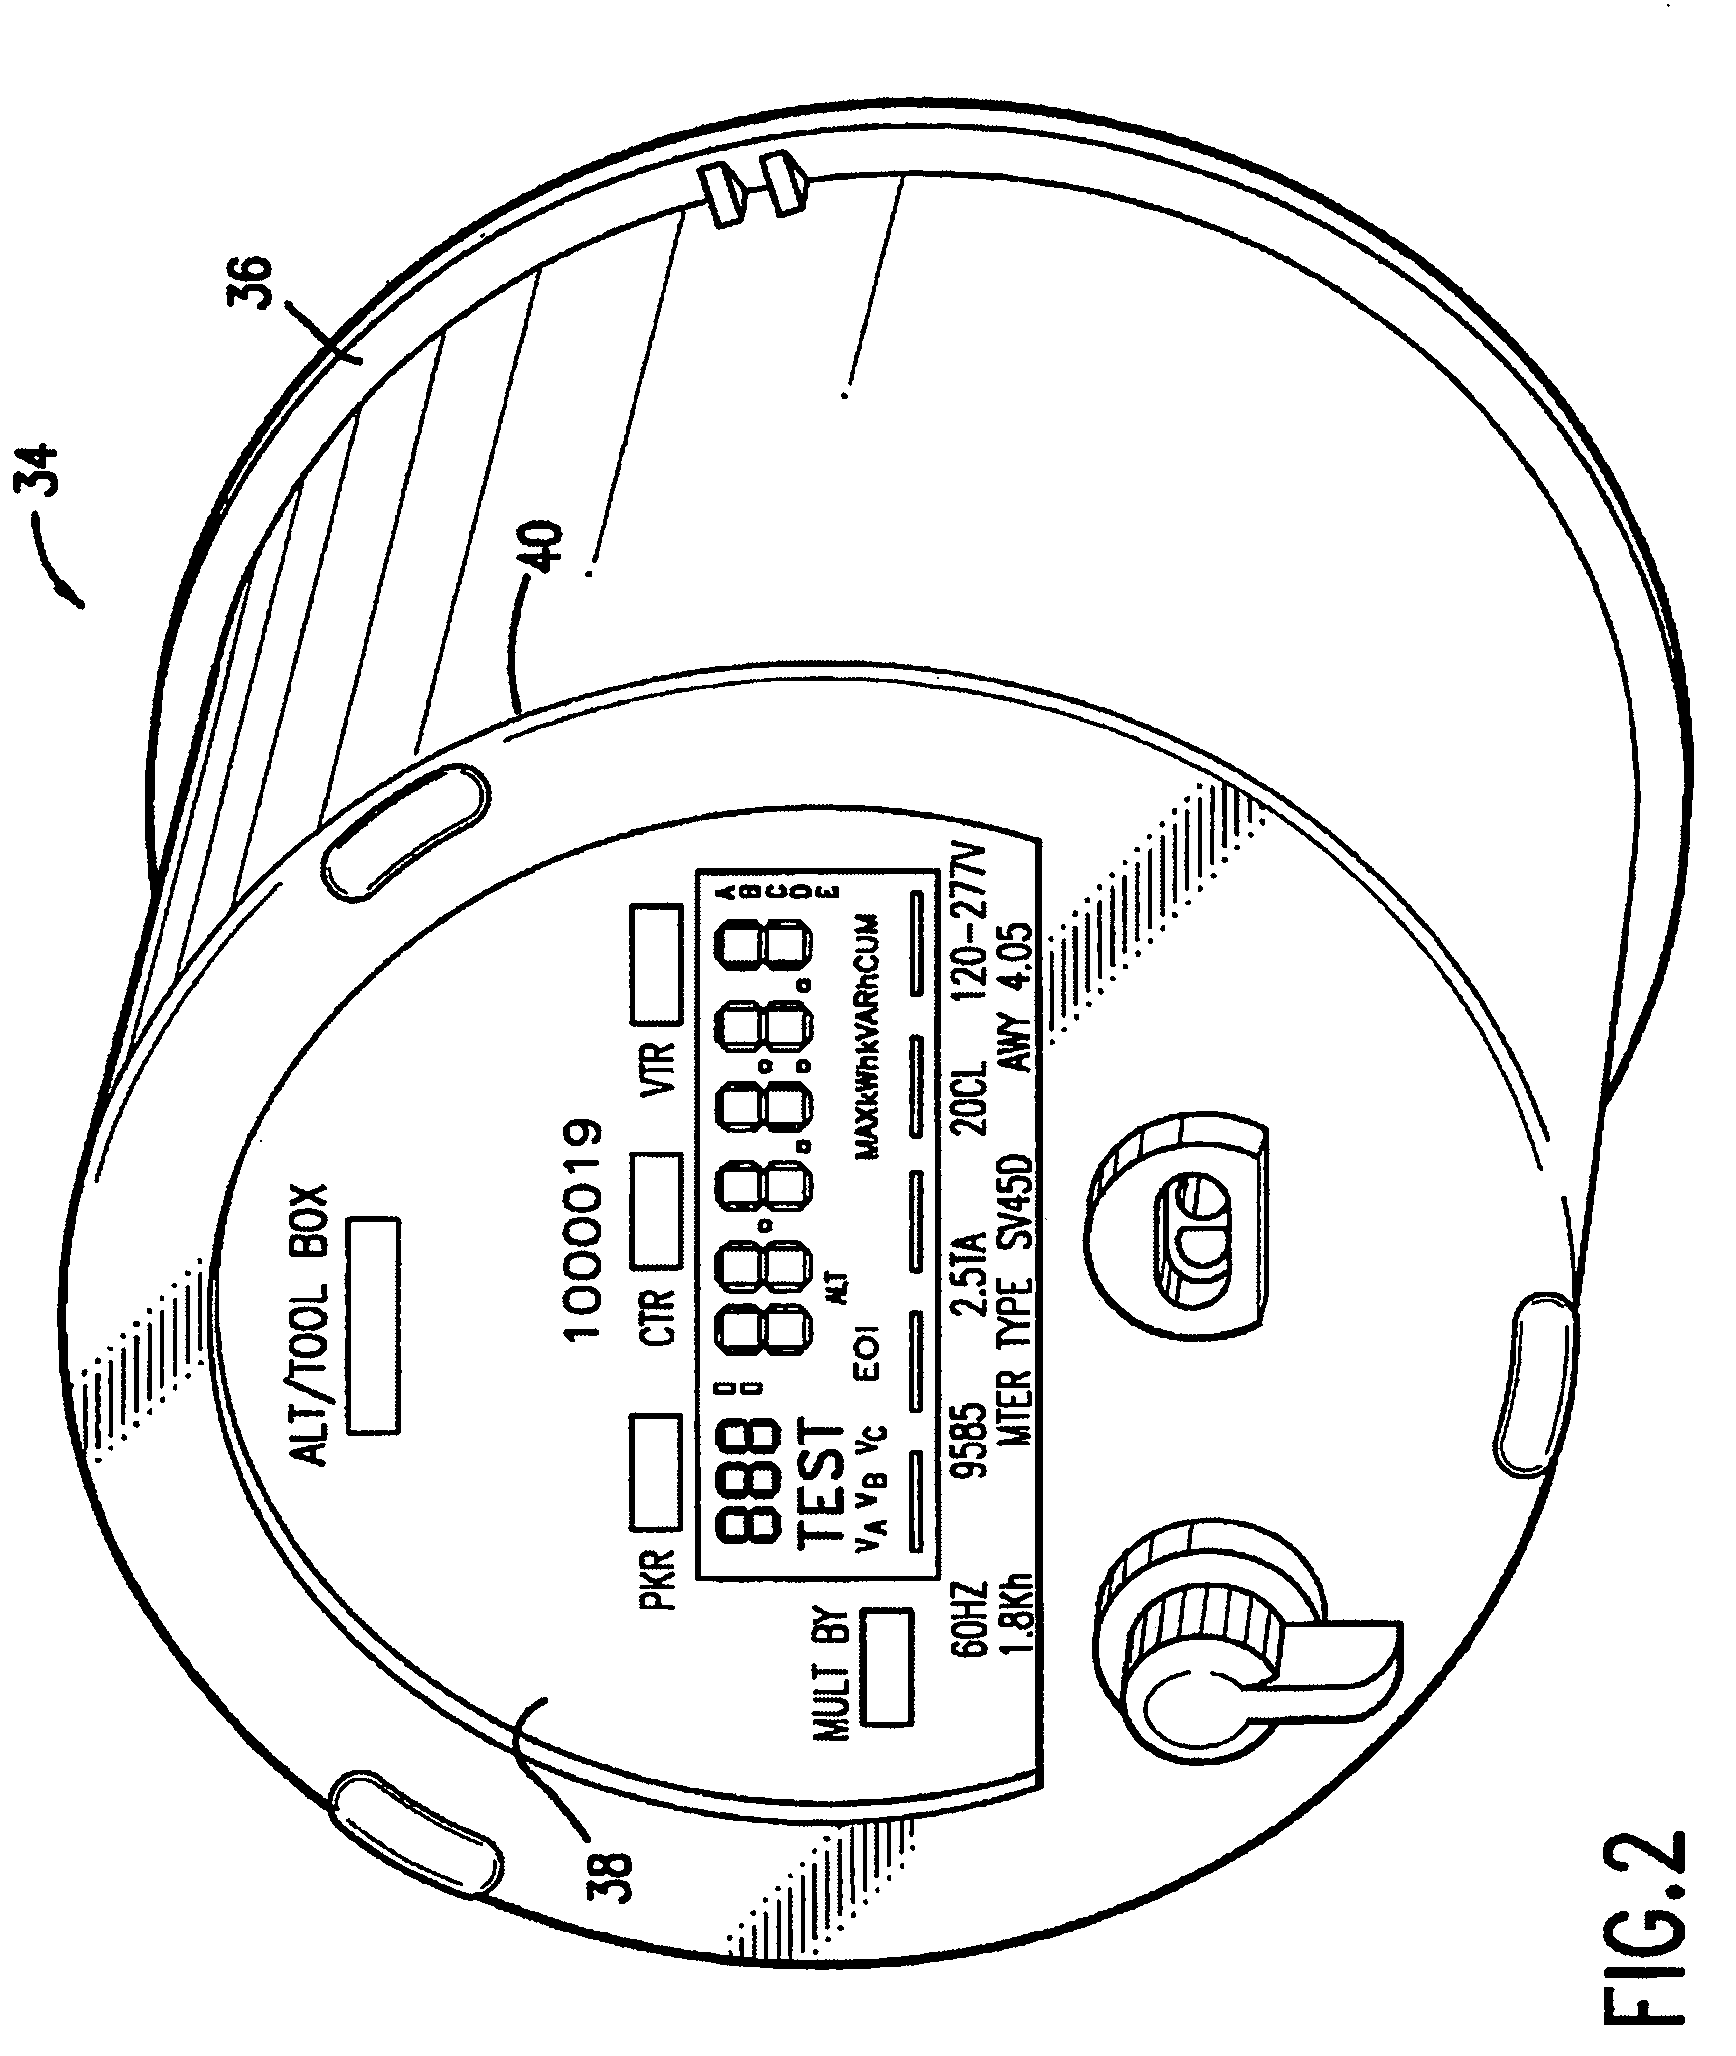 Electronic revenue meter with automatic service sensing